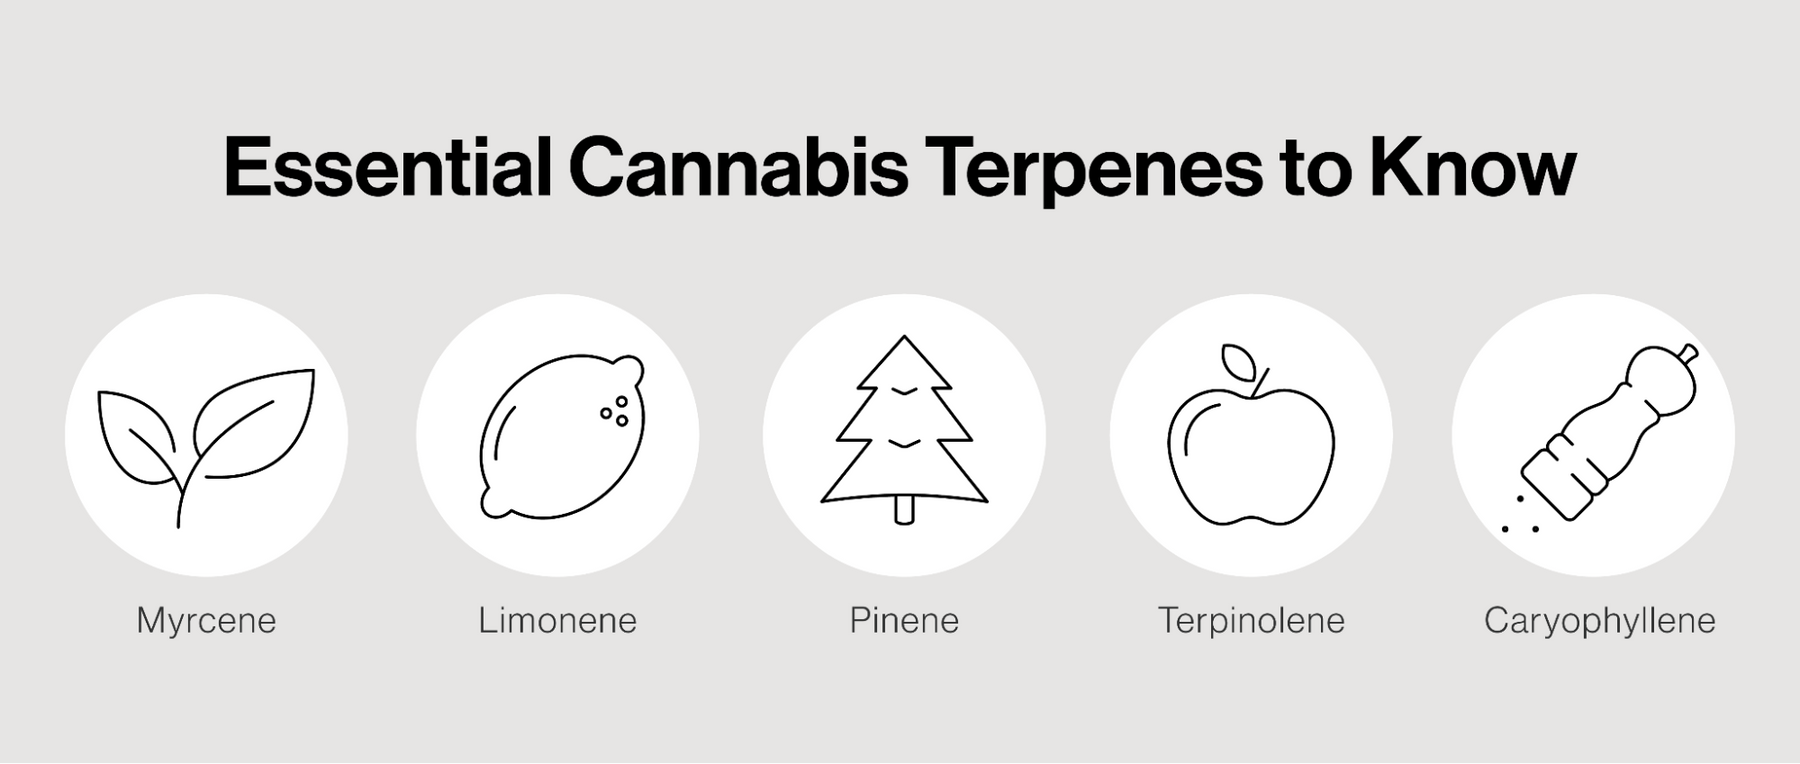 Essential Cannabis Terpenes to Know